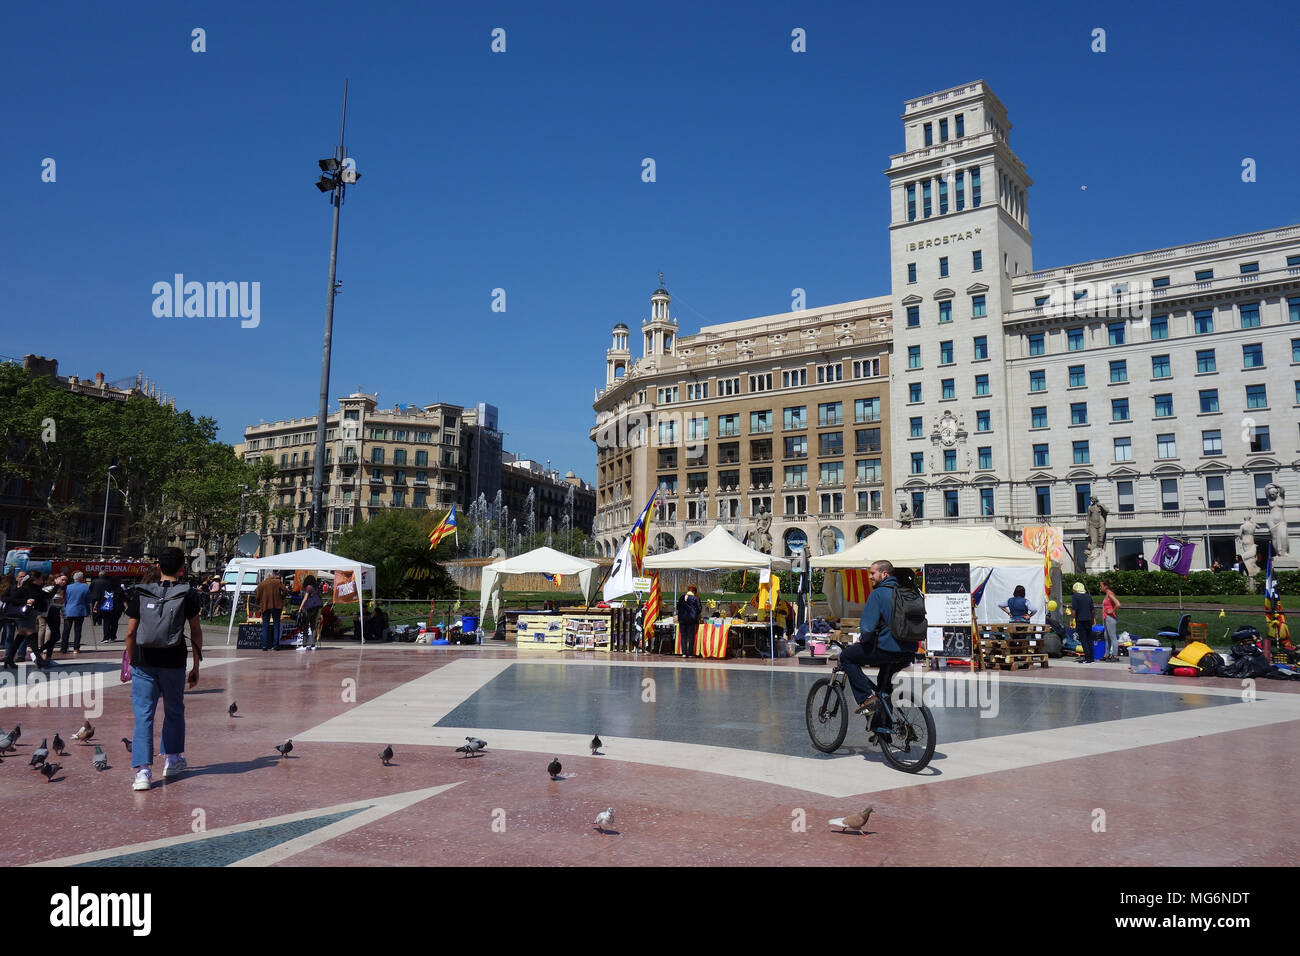 Stalls for pro-independence and freedom for political prisoners in Plaza de Cataluña, Barcelona Stock Photo